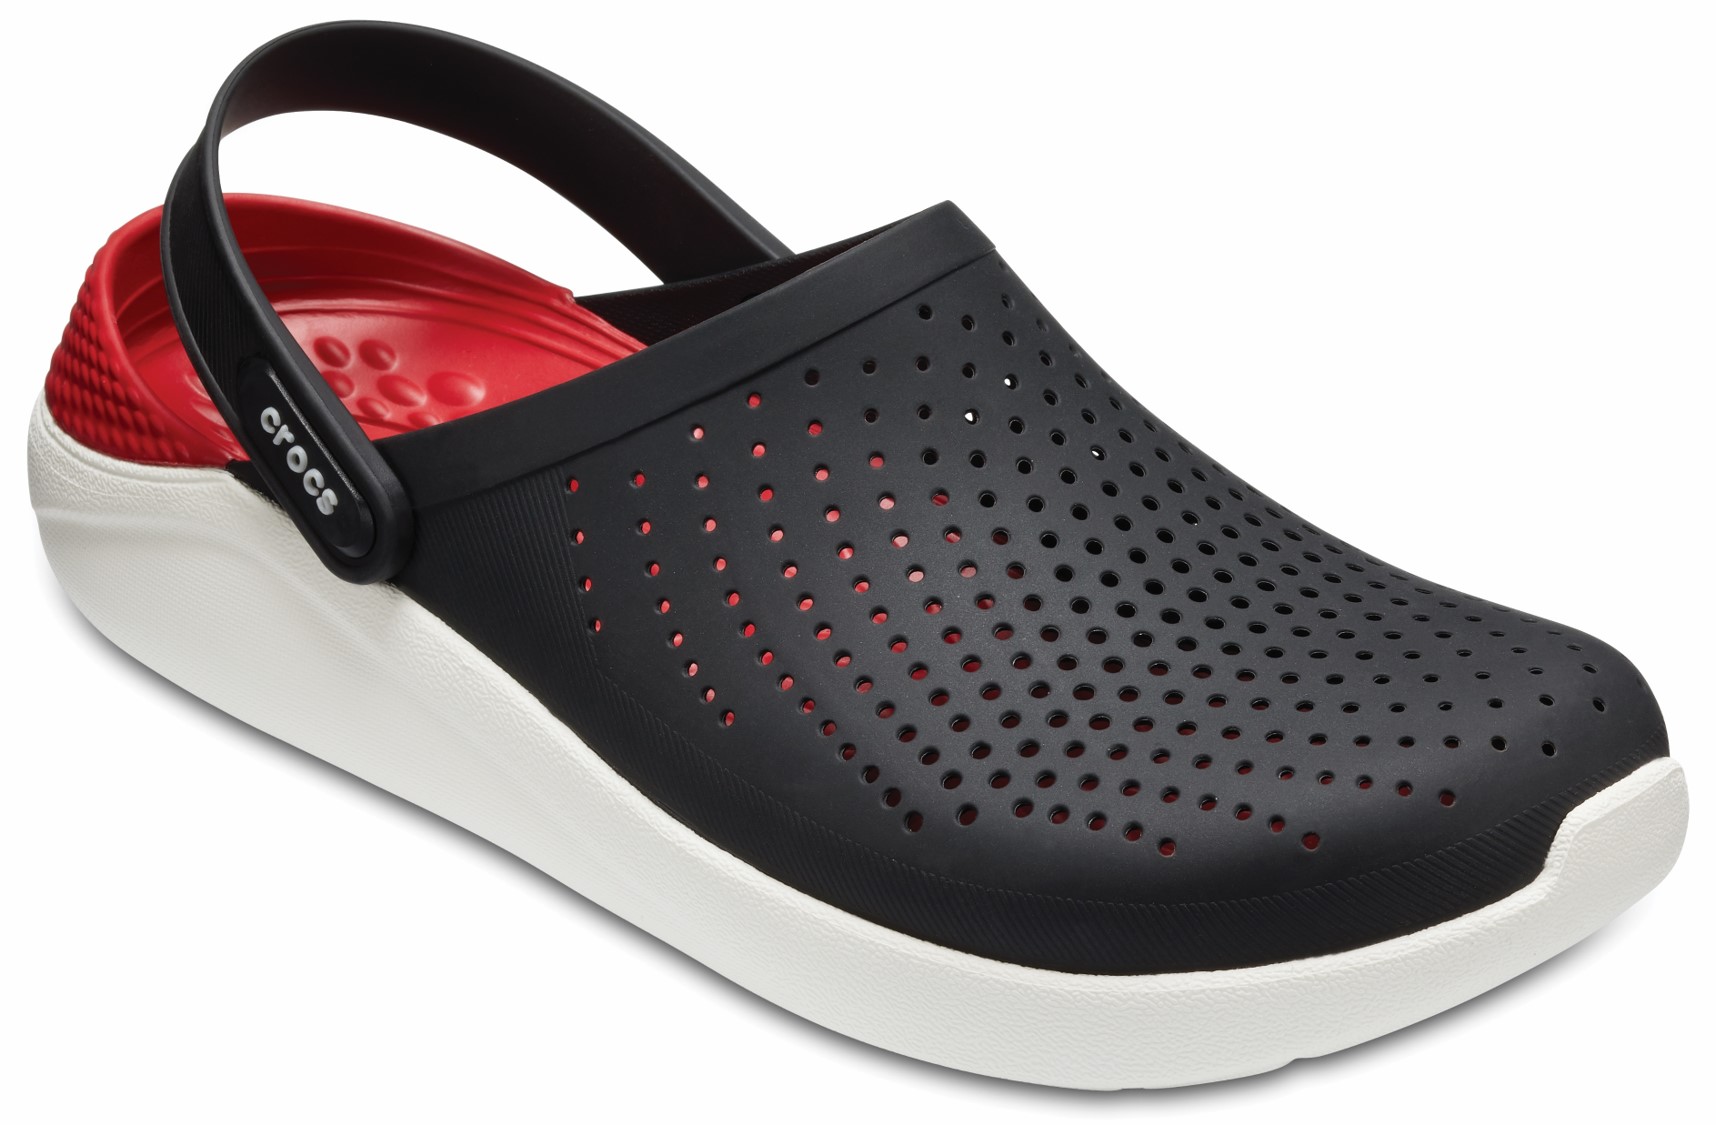 The new Crocs LiteRide clog launches on  and select stores this  month_Crocs,  image_Download_PR-Newswire